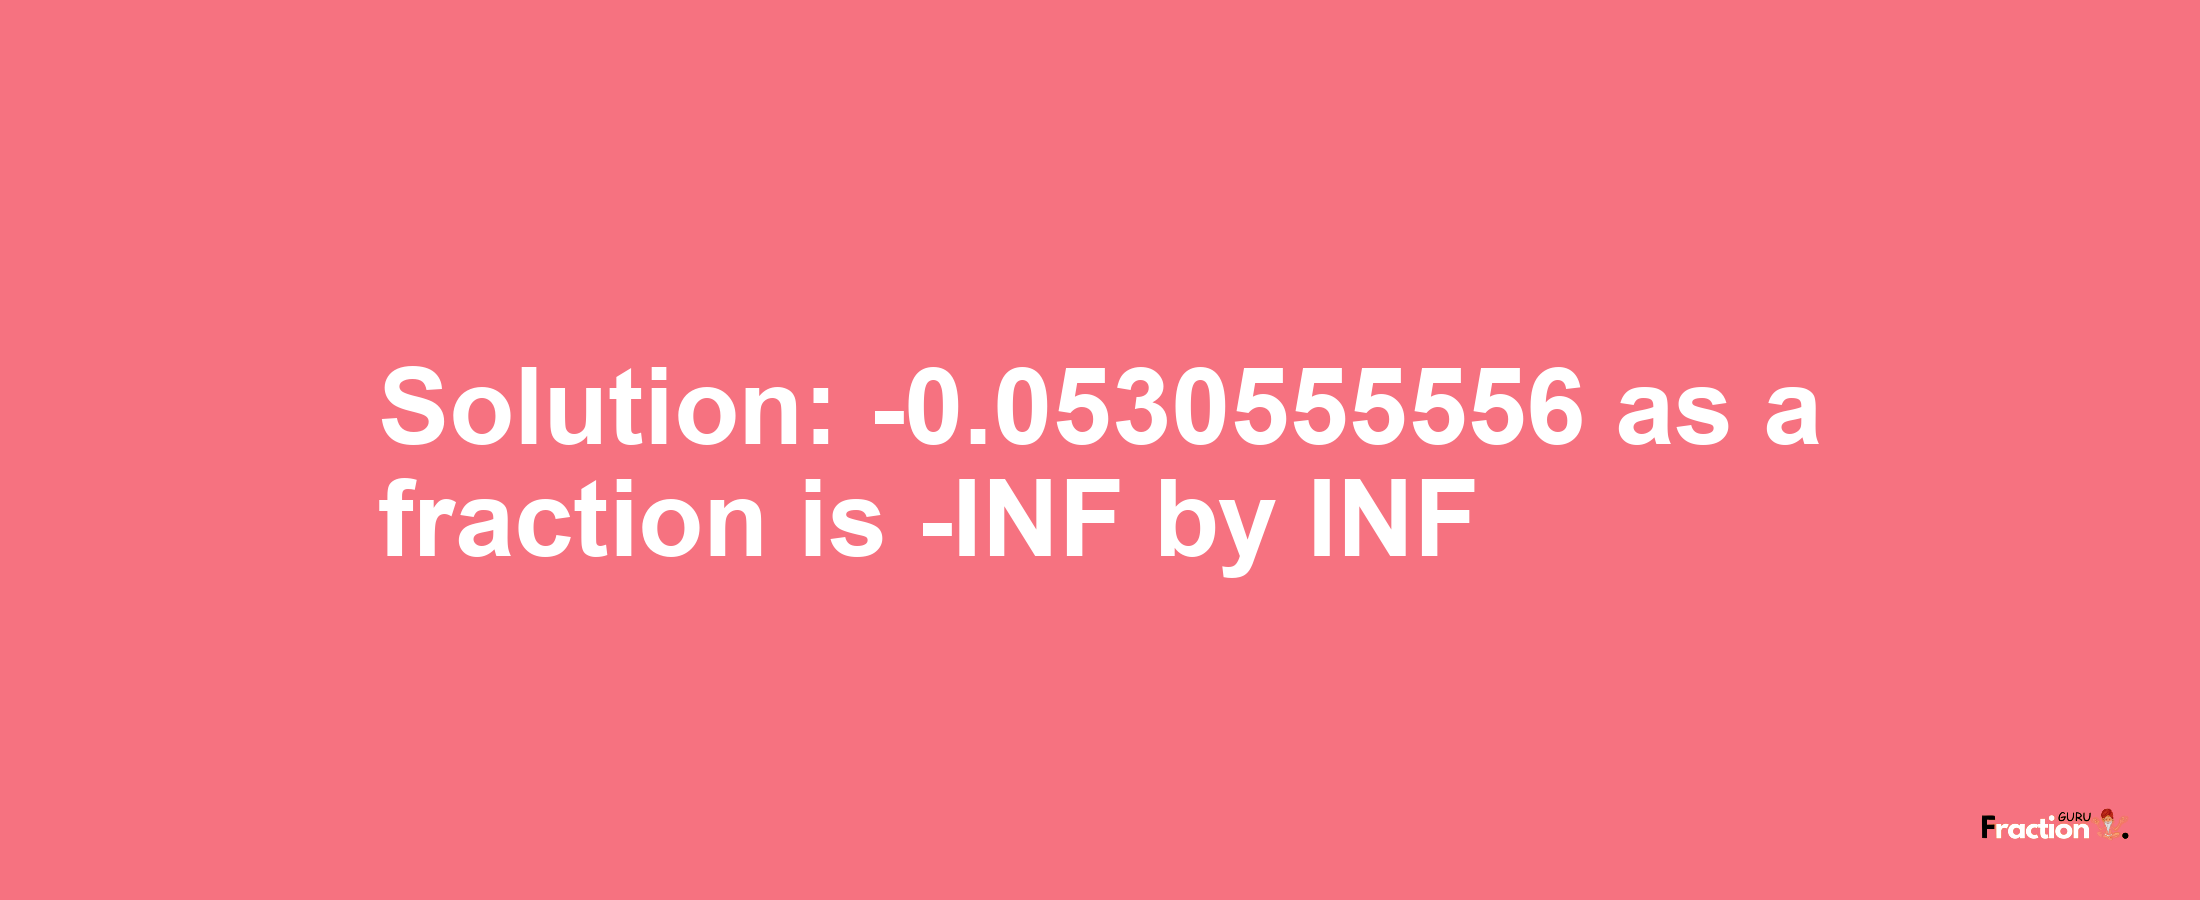 Solution:-0.0530555556 as a fraction is -INF/INF